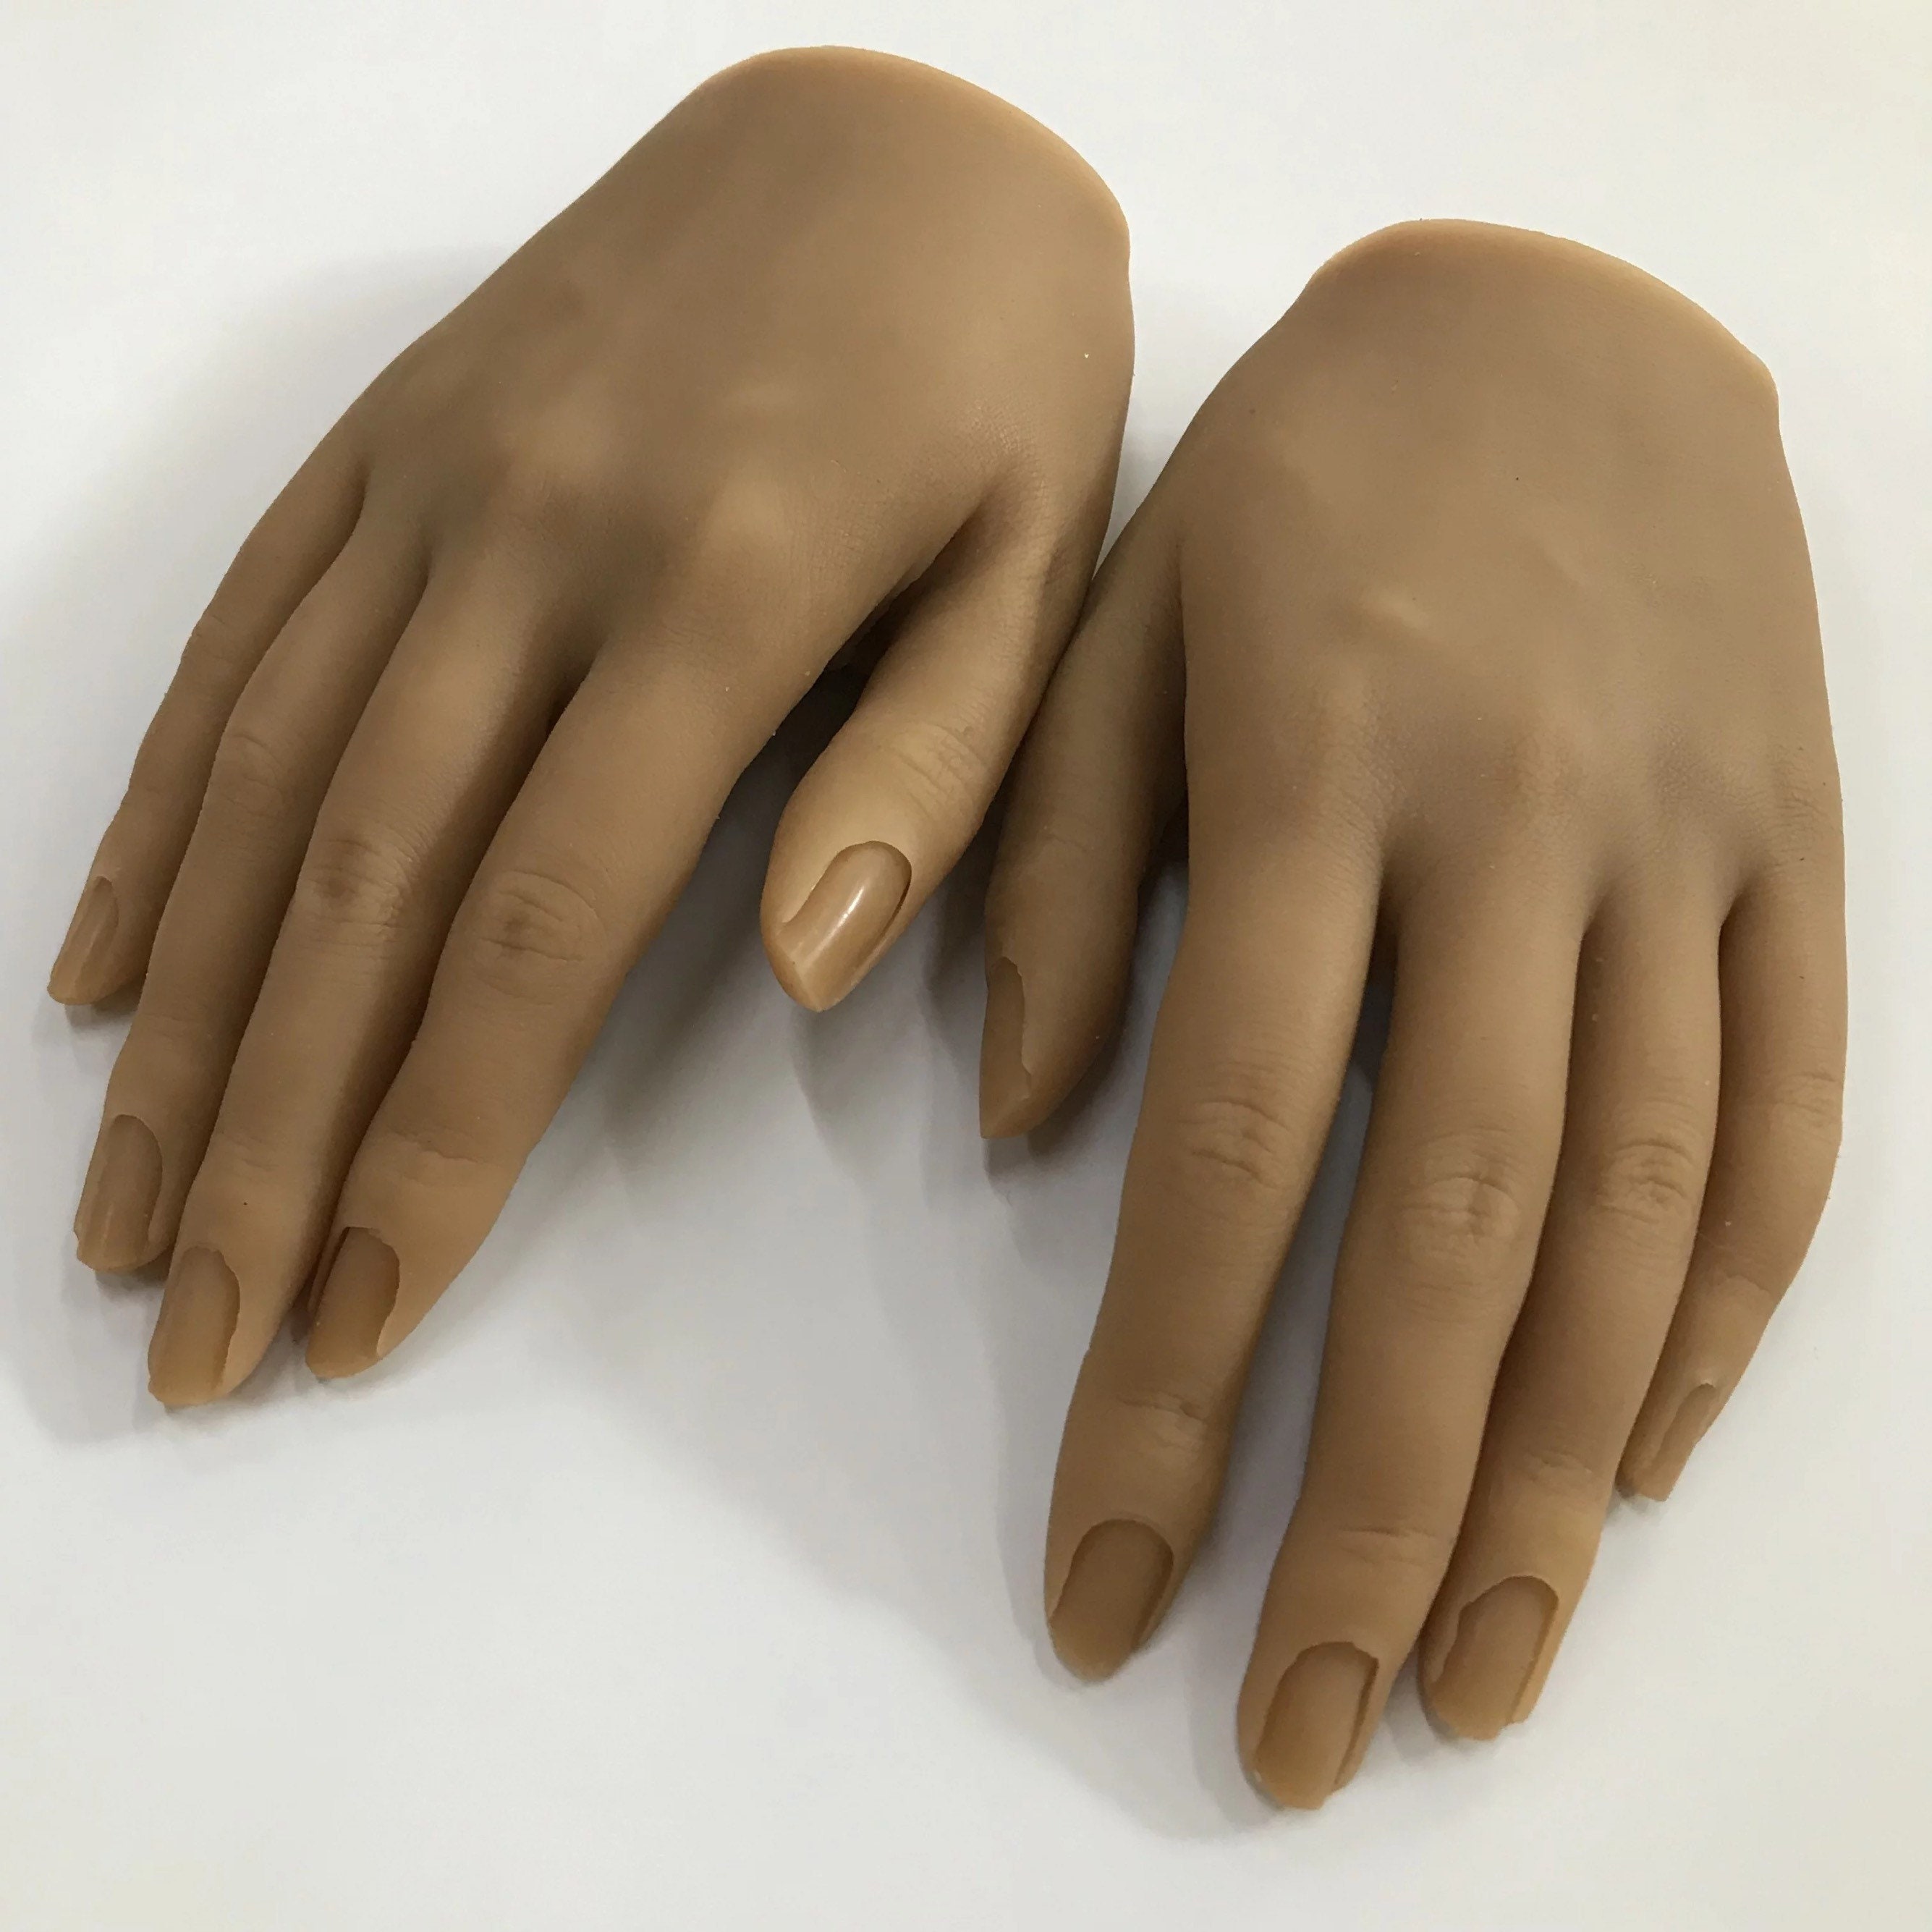 Fake Hand, Silicone Hand, Fake Hand, Hand Prop, Silicone Hand -  Norway